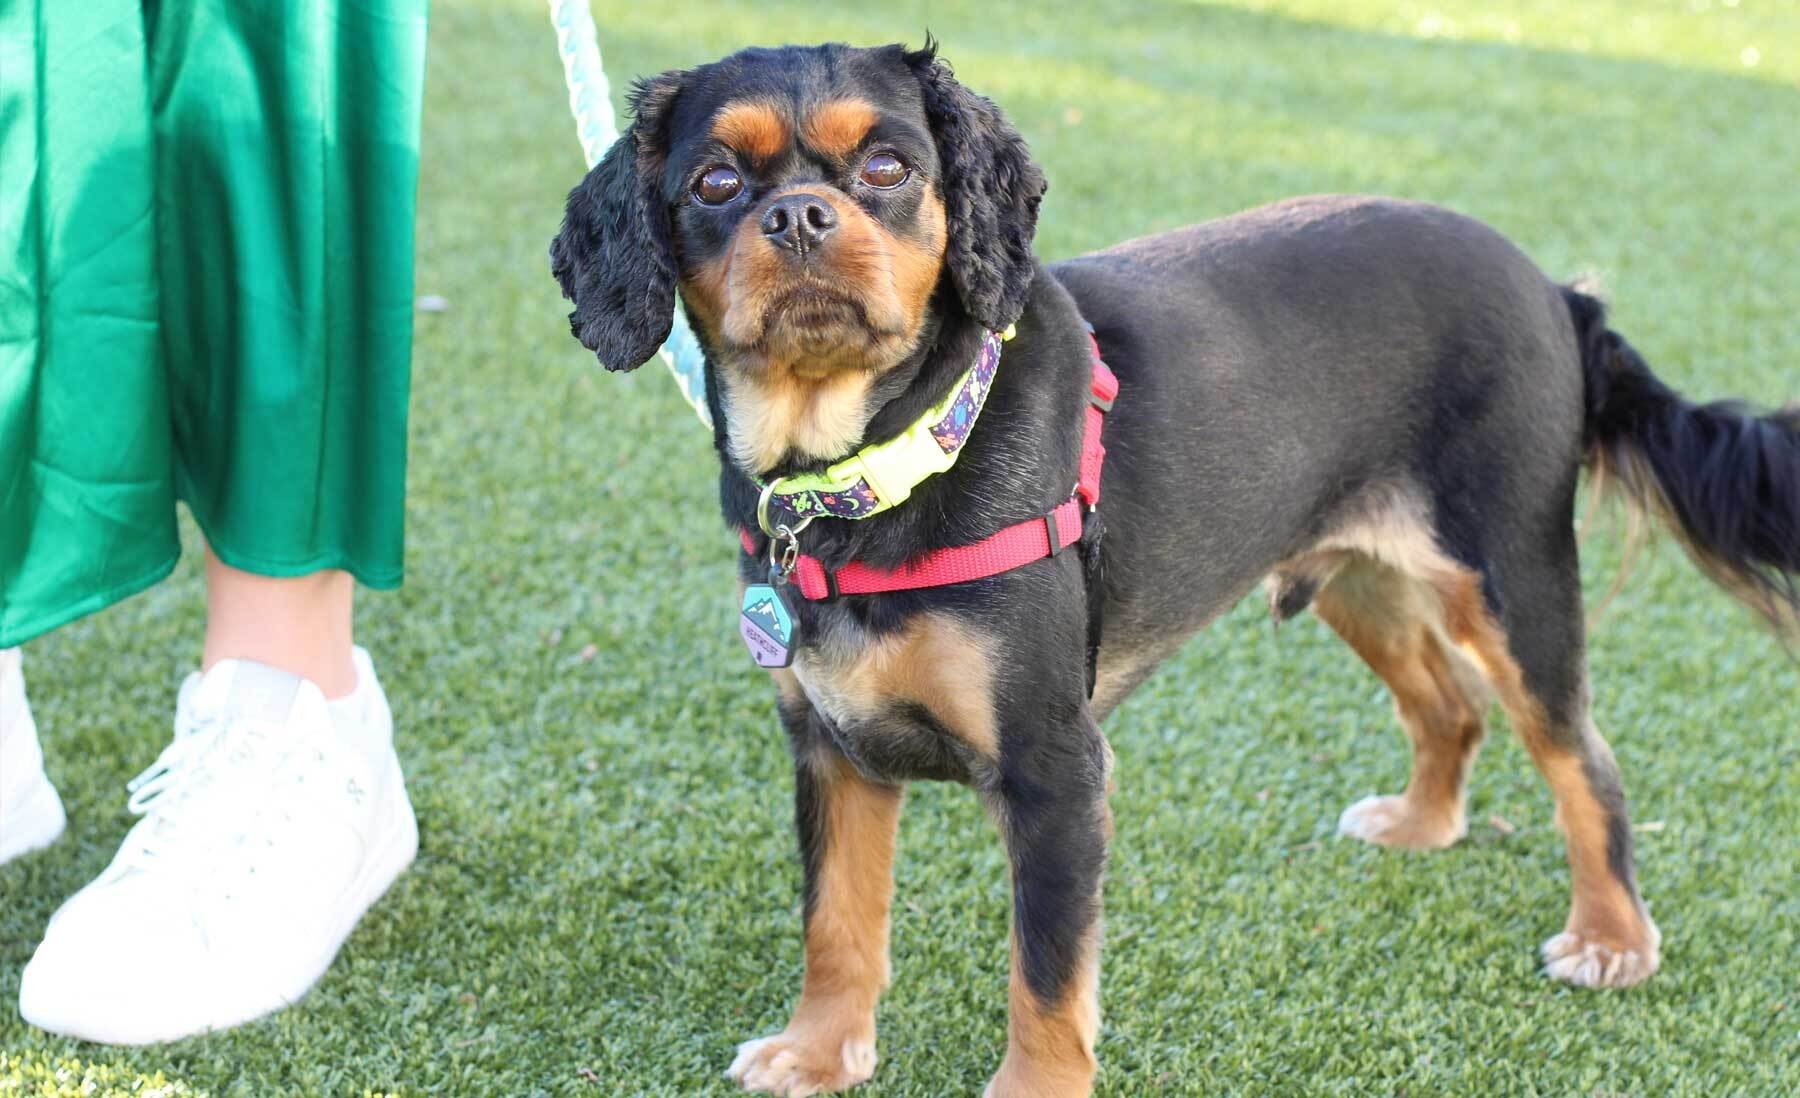 An image of a small dog looking at the camera while standing on some green turf